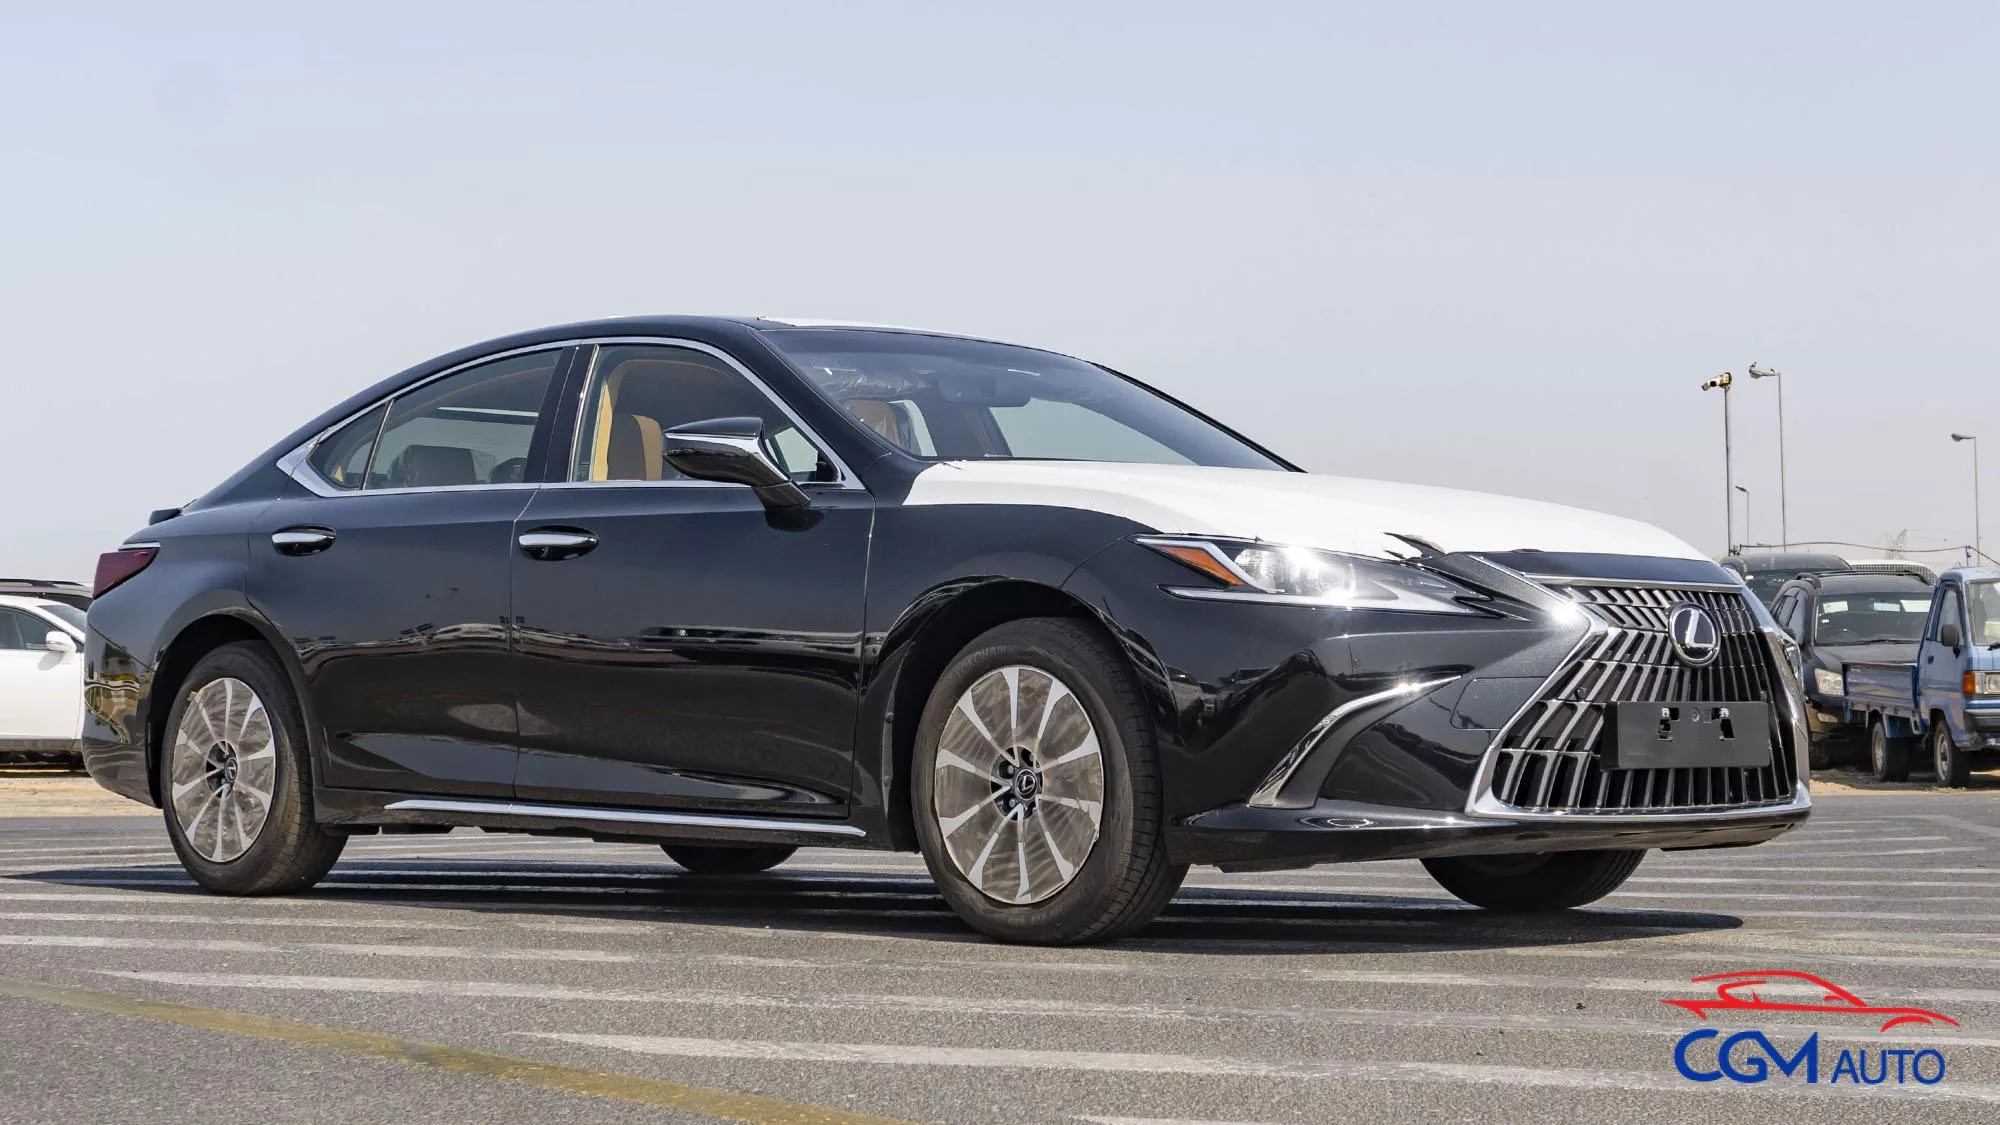 2023 Lexus ES300 Explore Exciting New Car Deals for Sale in UAE, Dubai, Sharjah, and Abu Dhabi | Offers